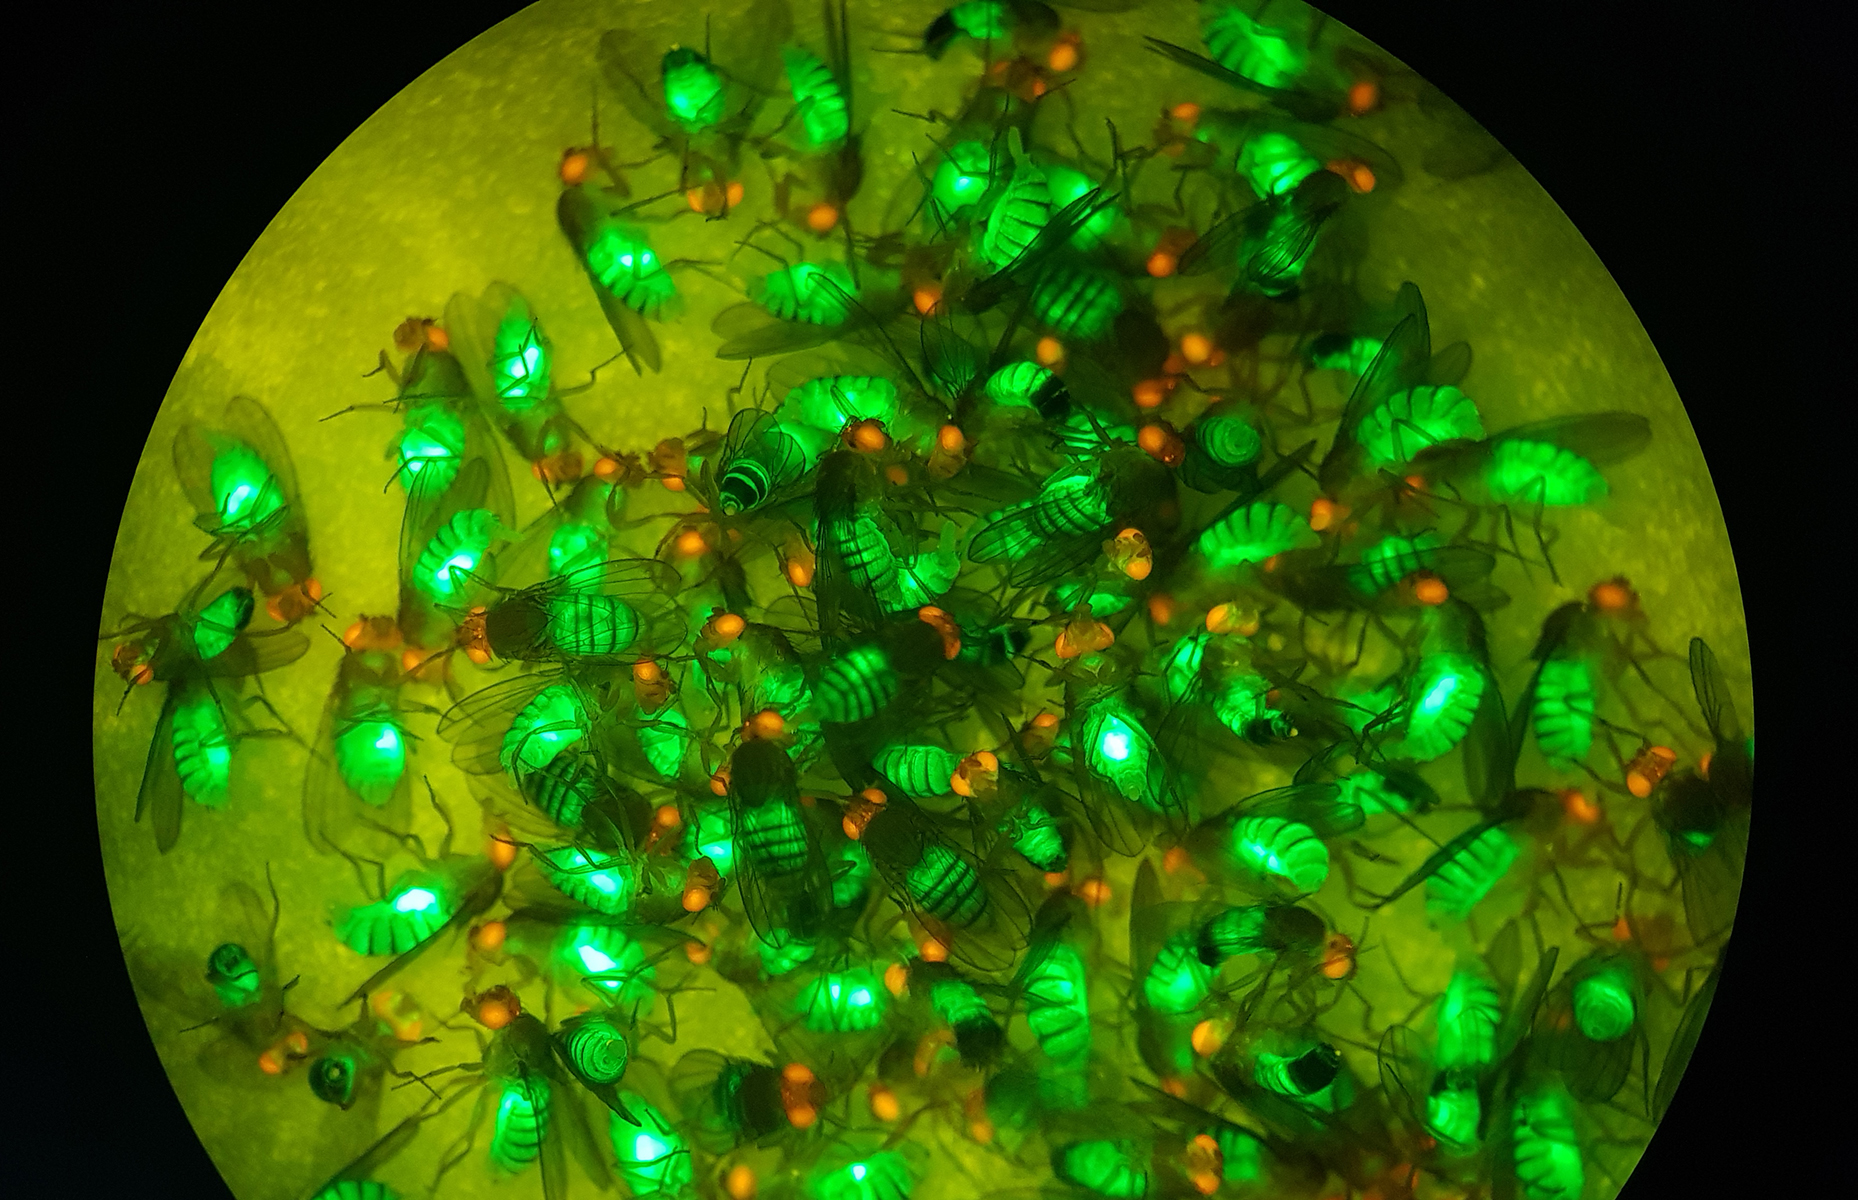 Fruit flies expressing red eye and green body fluorescent markers demonstrated the viability of a new system for safely converting split gene drives into full gene drives.